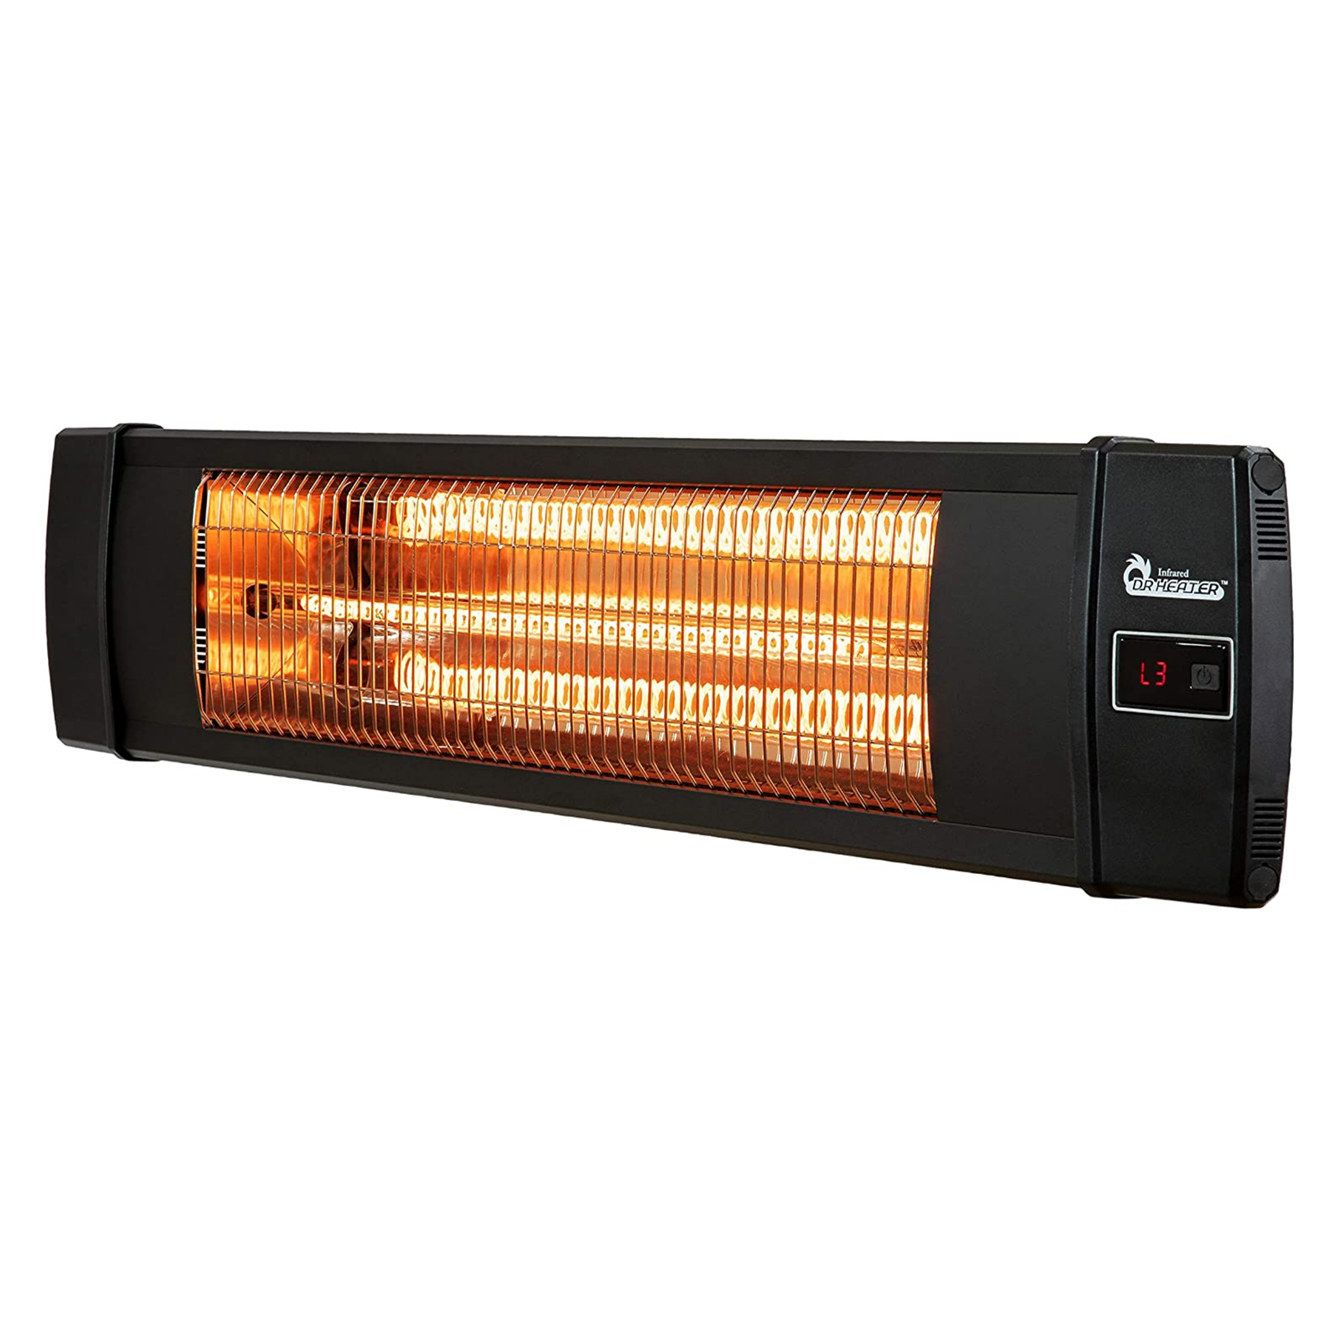 An image of a Dr. Infrared heater 